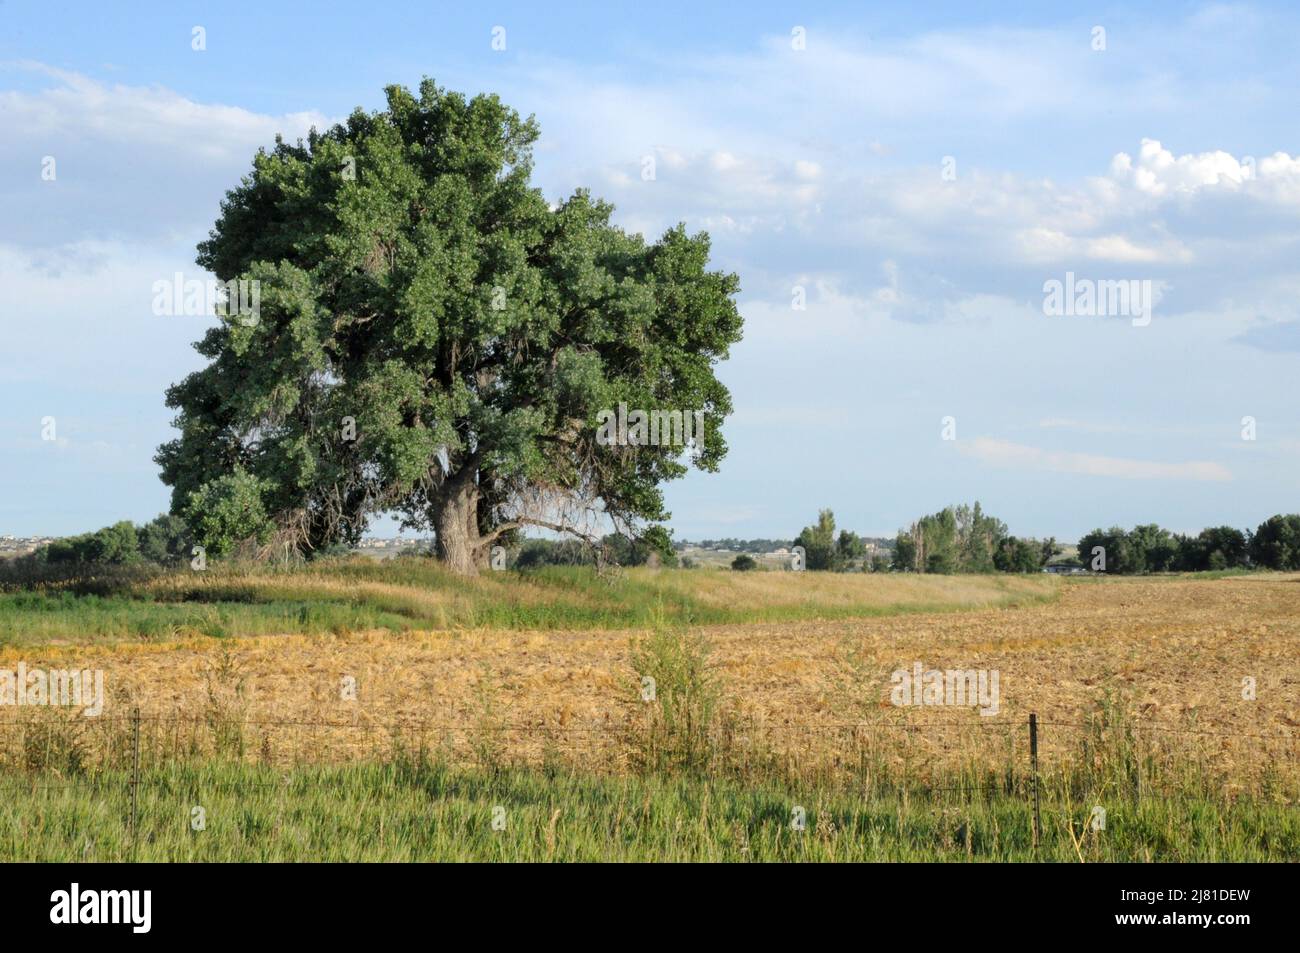 Group of lone trees with green leaves in golden agricultural field and cloudy blue sky Stock Photo